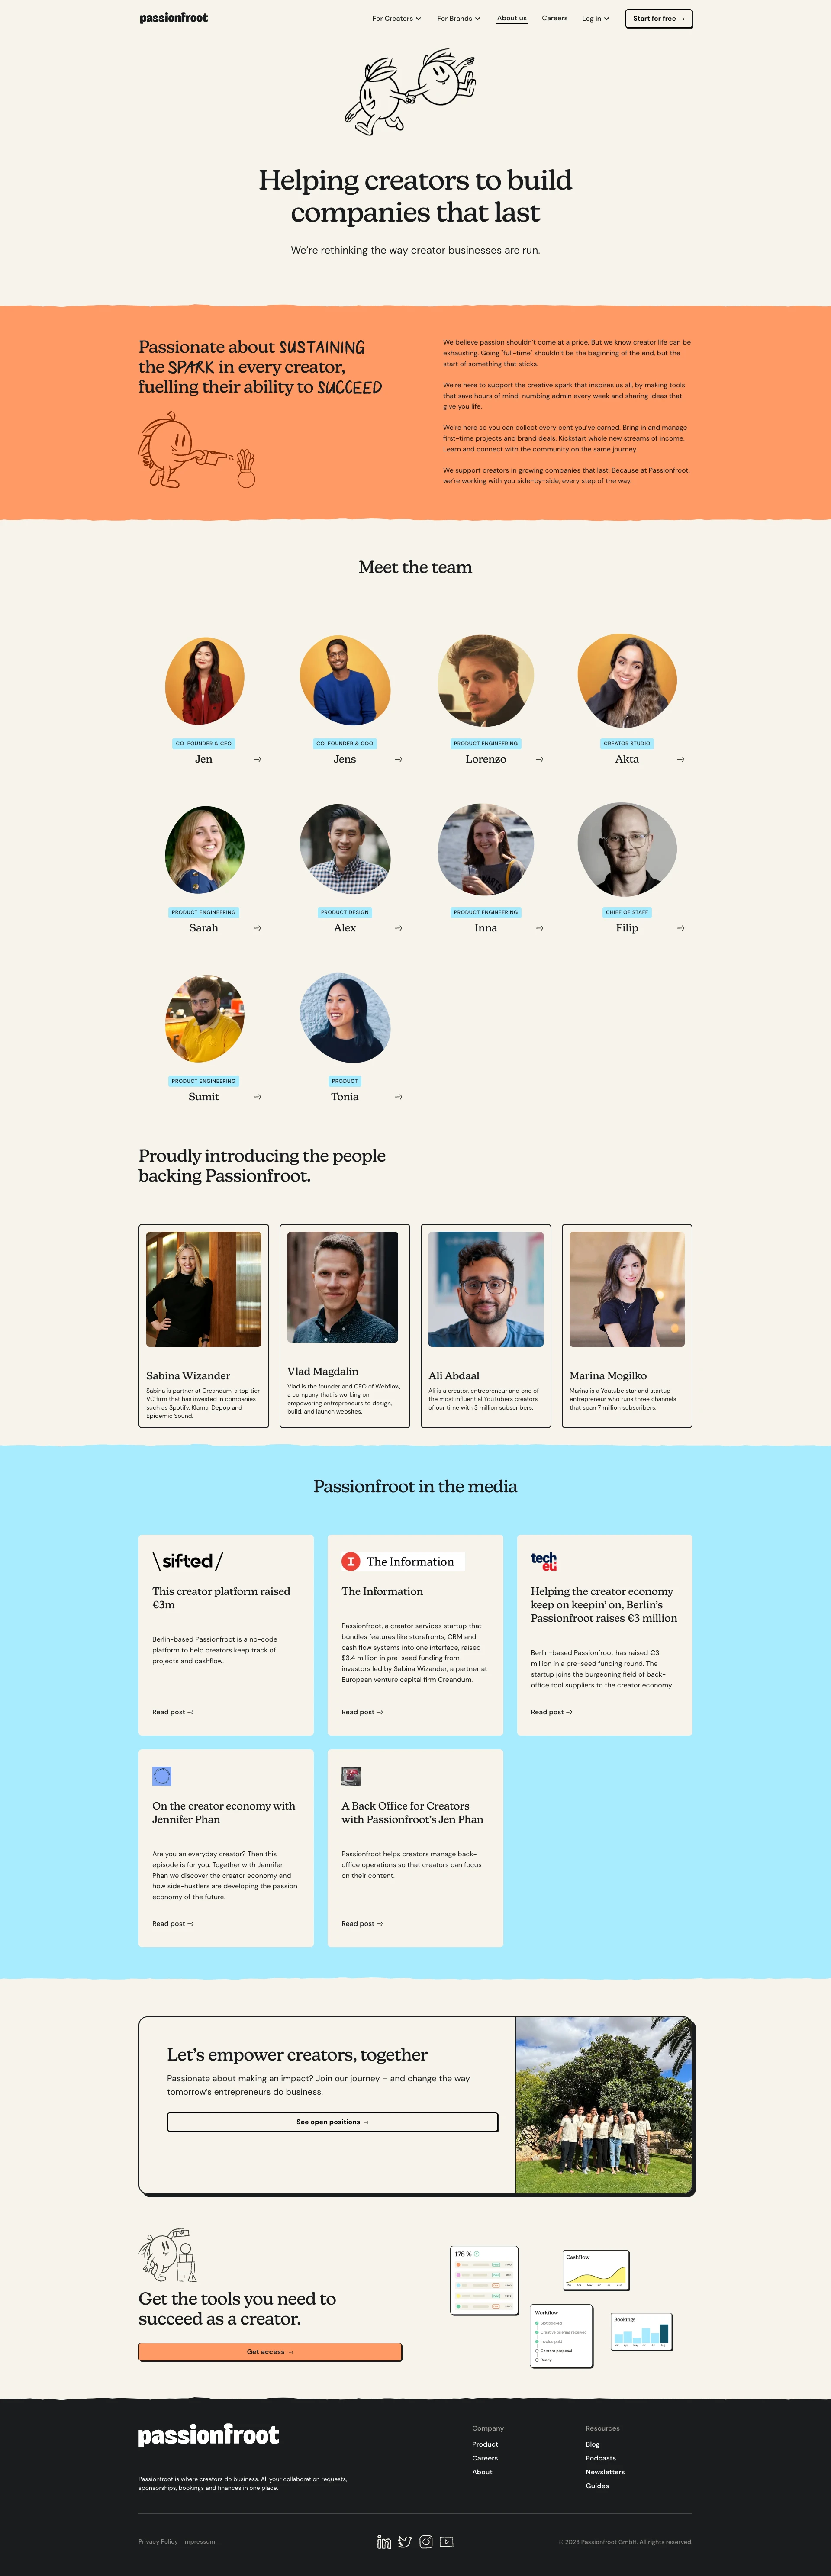 Passionfroot Landing Page Example: Passionfroot lets you handle sponsorships, collaboration requests, bookings, and payments – in one single place. Stop feeling overwhelmed by the opportunities. Start seizing them.